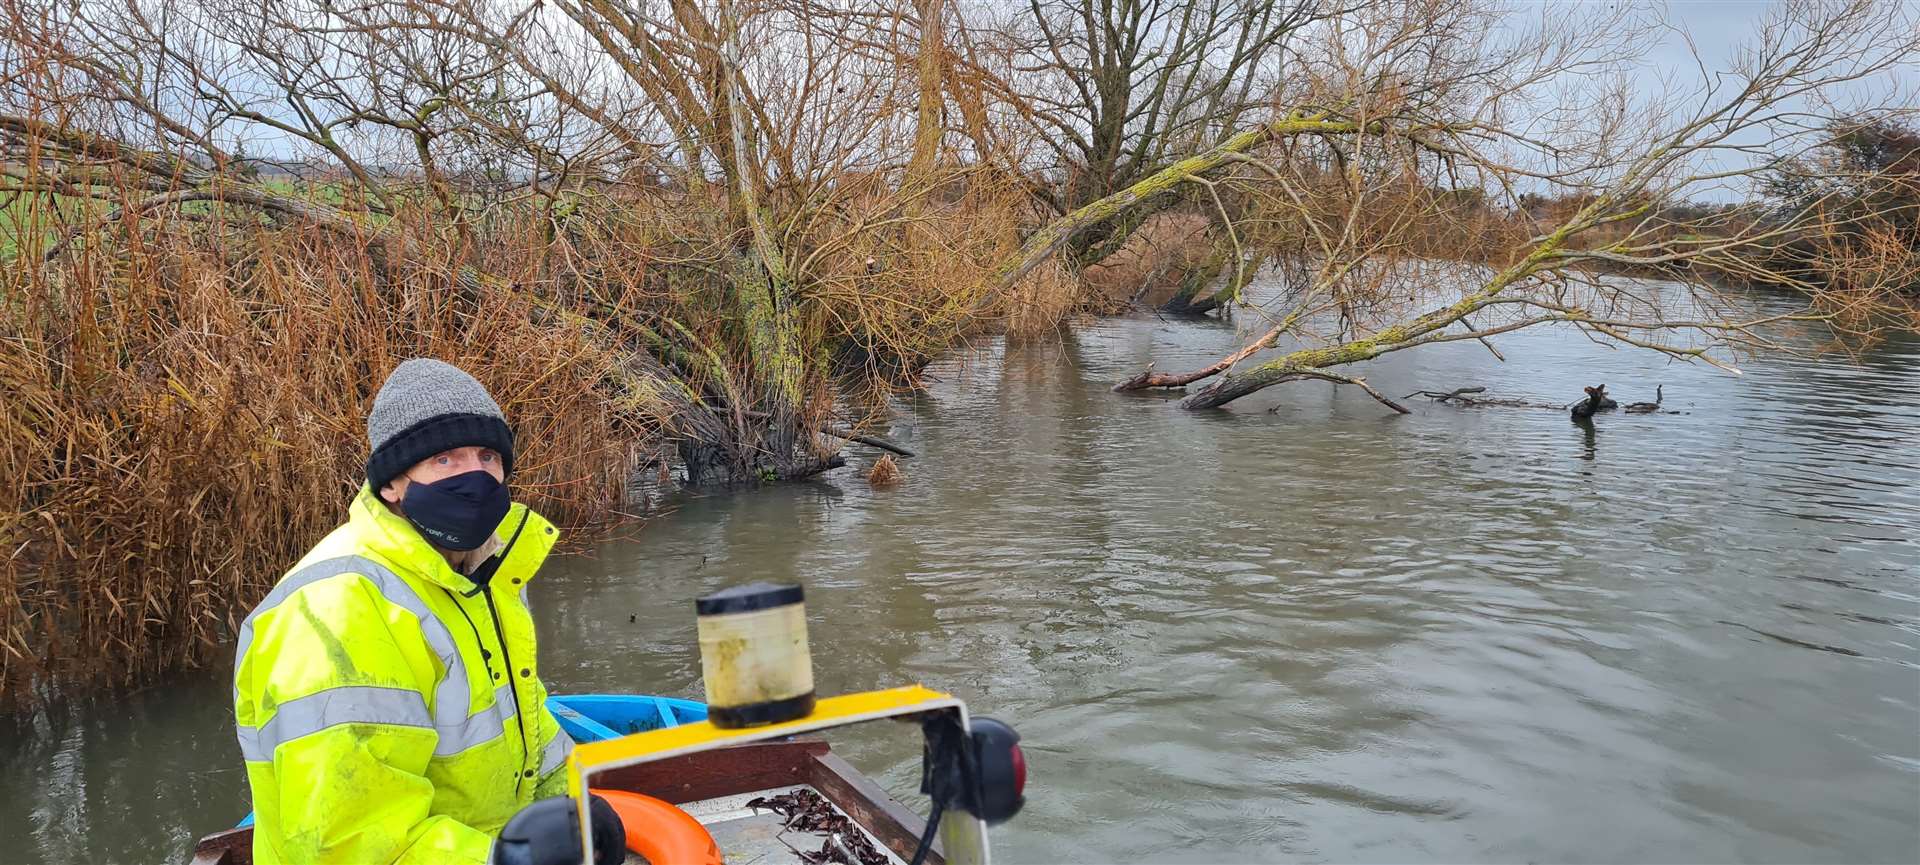 Grove Ferry boatyard owner Roy Newing says dozens of trees in the Stour are creating a flooding risk